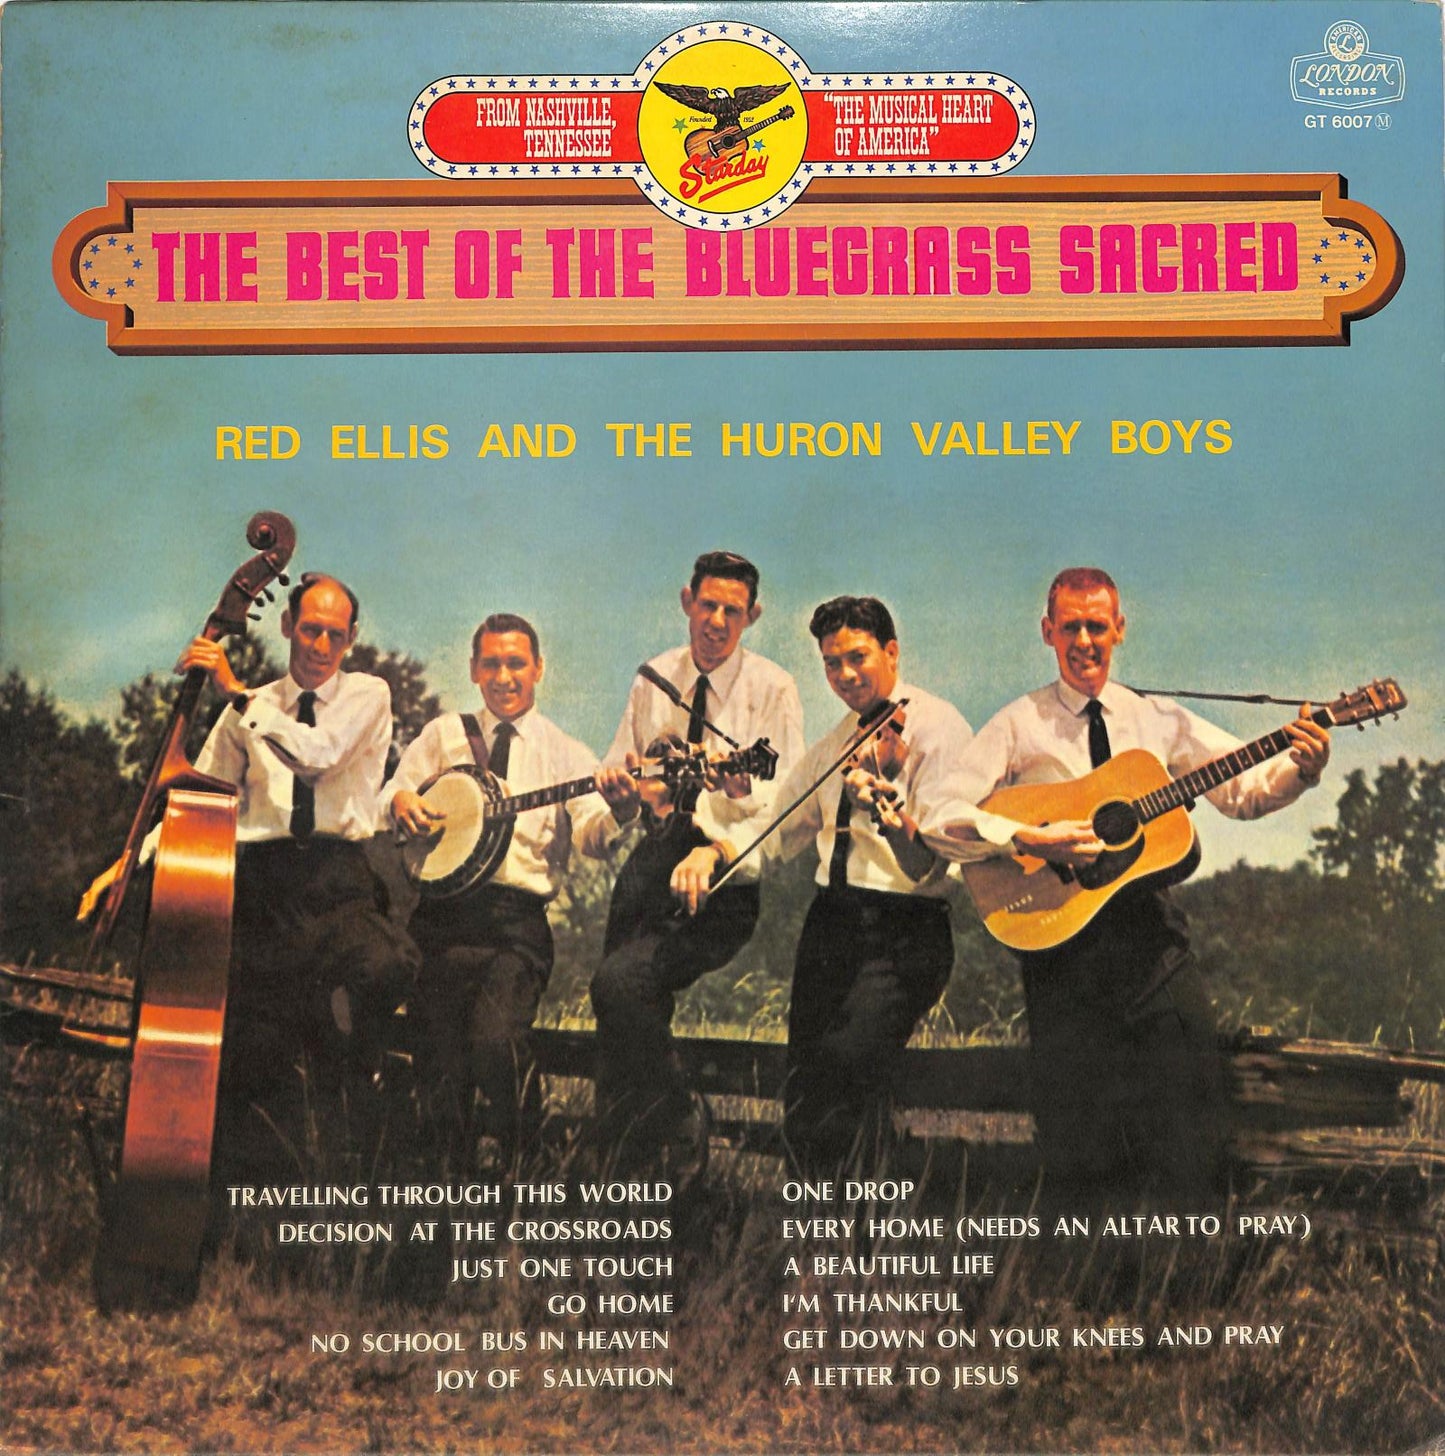 RED ELLIS & THE HURON VALLEY BOYS - The Best Of The Bluegrass Sacred